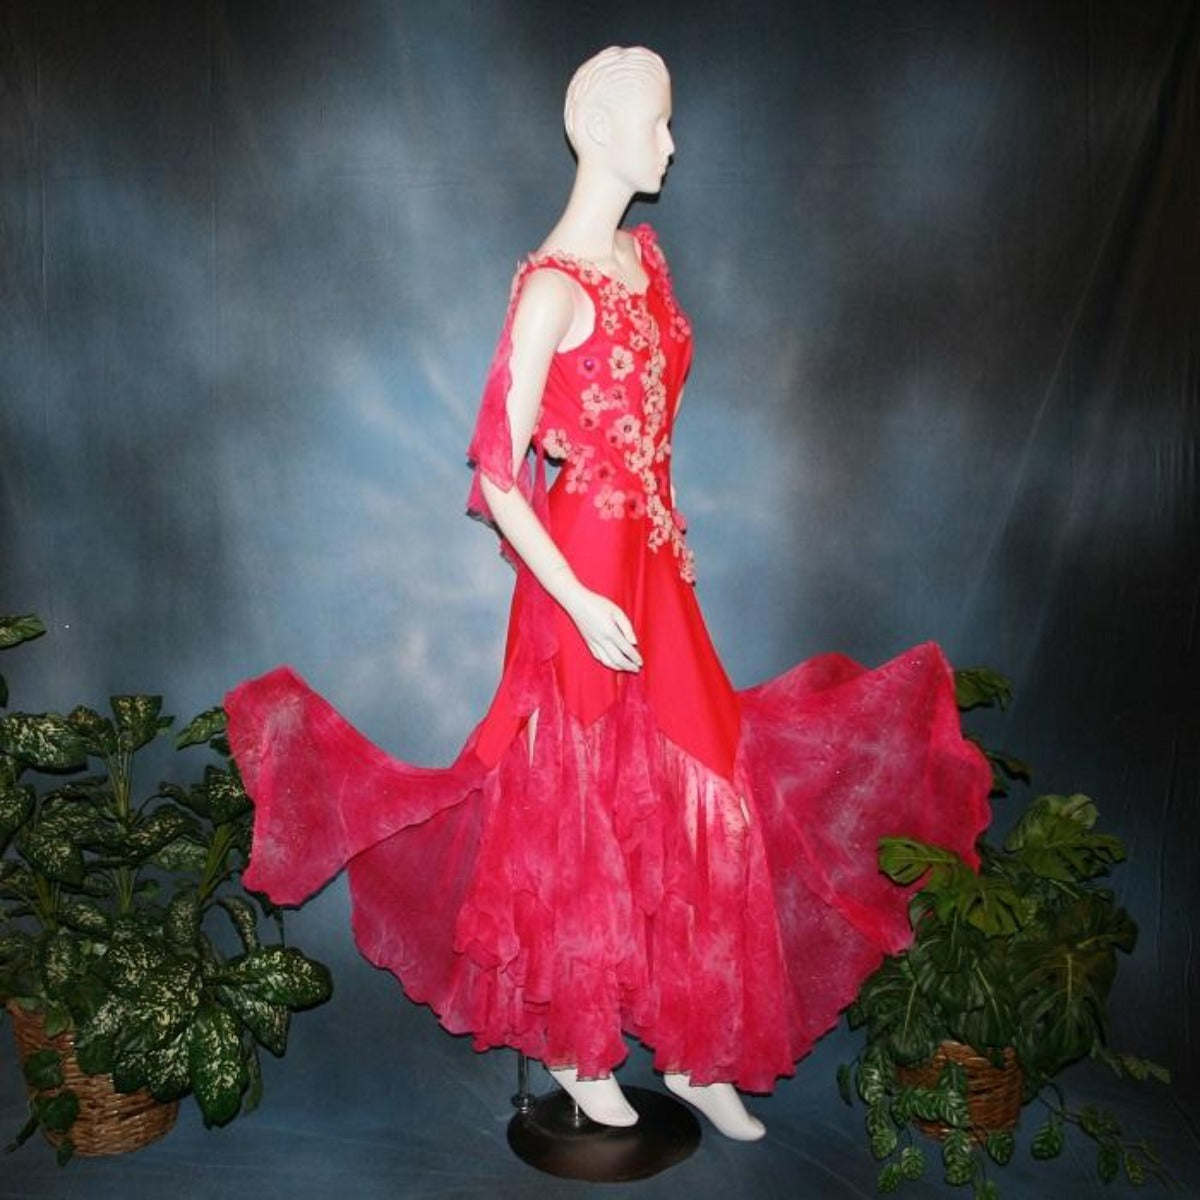 Crystal's Creations side view of Deep pink ballroom dress created of Indian pink lycra base with yards & yards of Indian pink print chiffon large & flowing flounces, embellishing done with silk flowers, accented with Swarovski stonework in Indian pink .